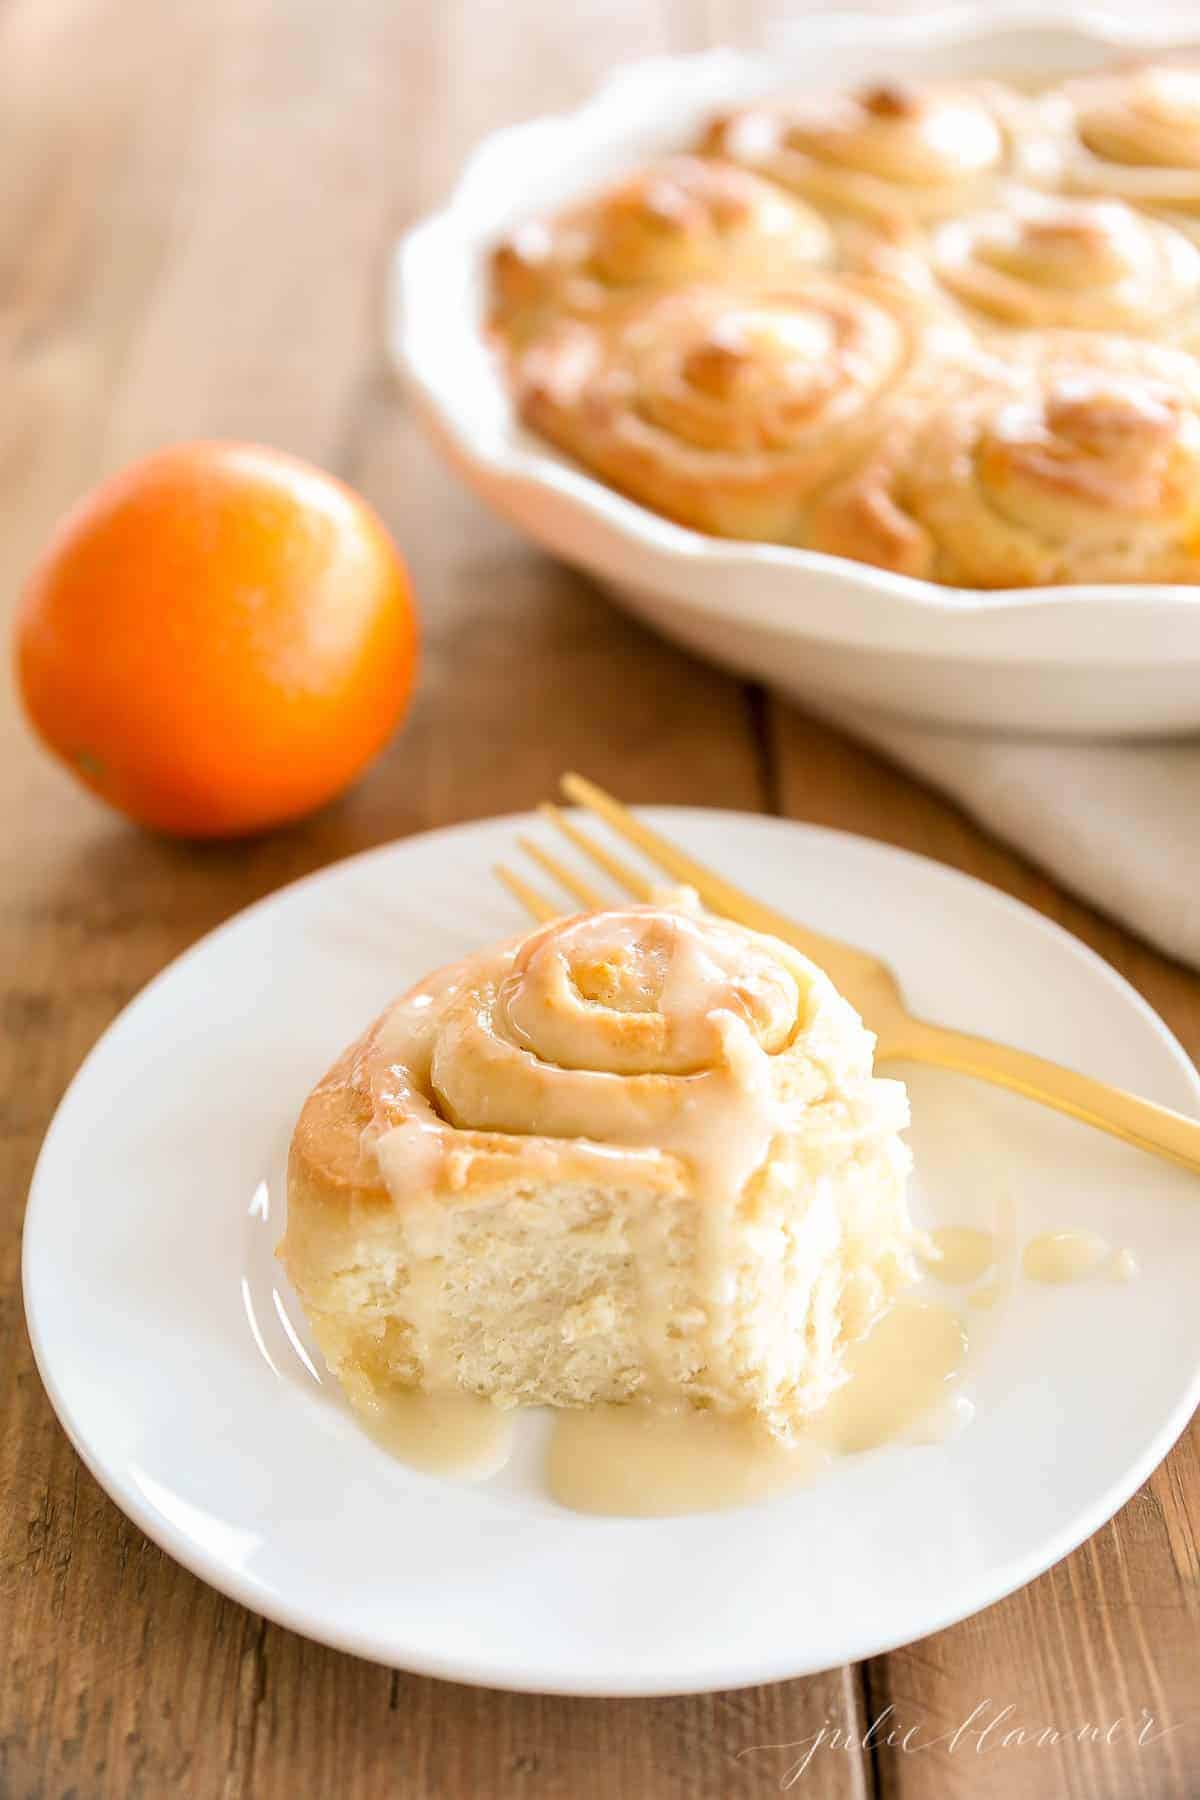 An orange roll on a white plate, gold fork to the side and oranges in the background.